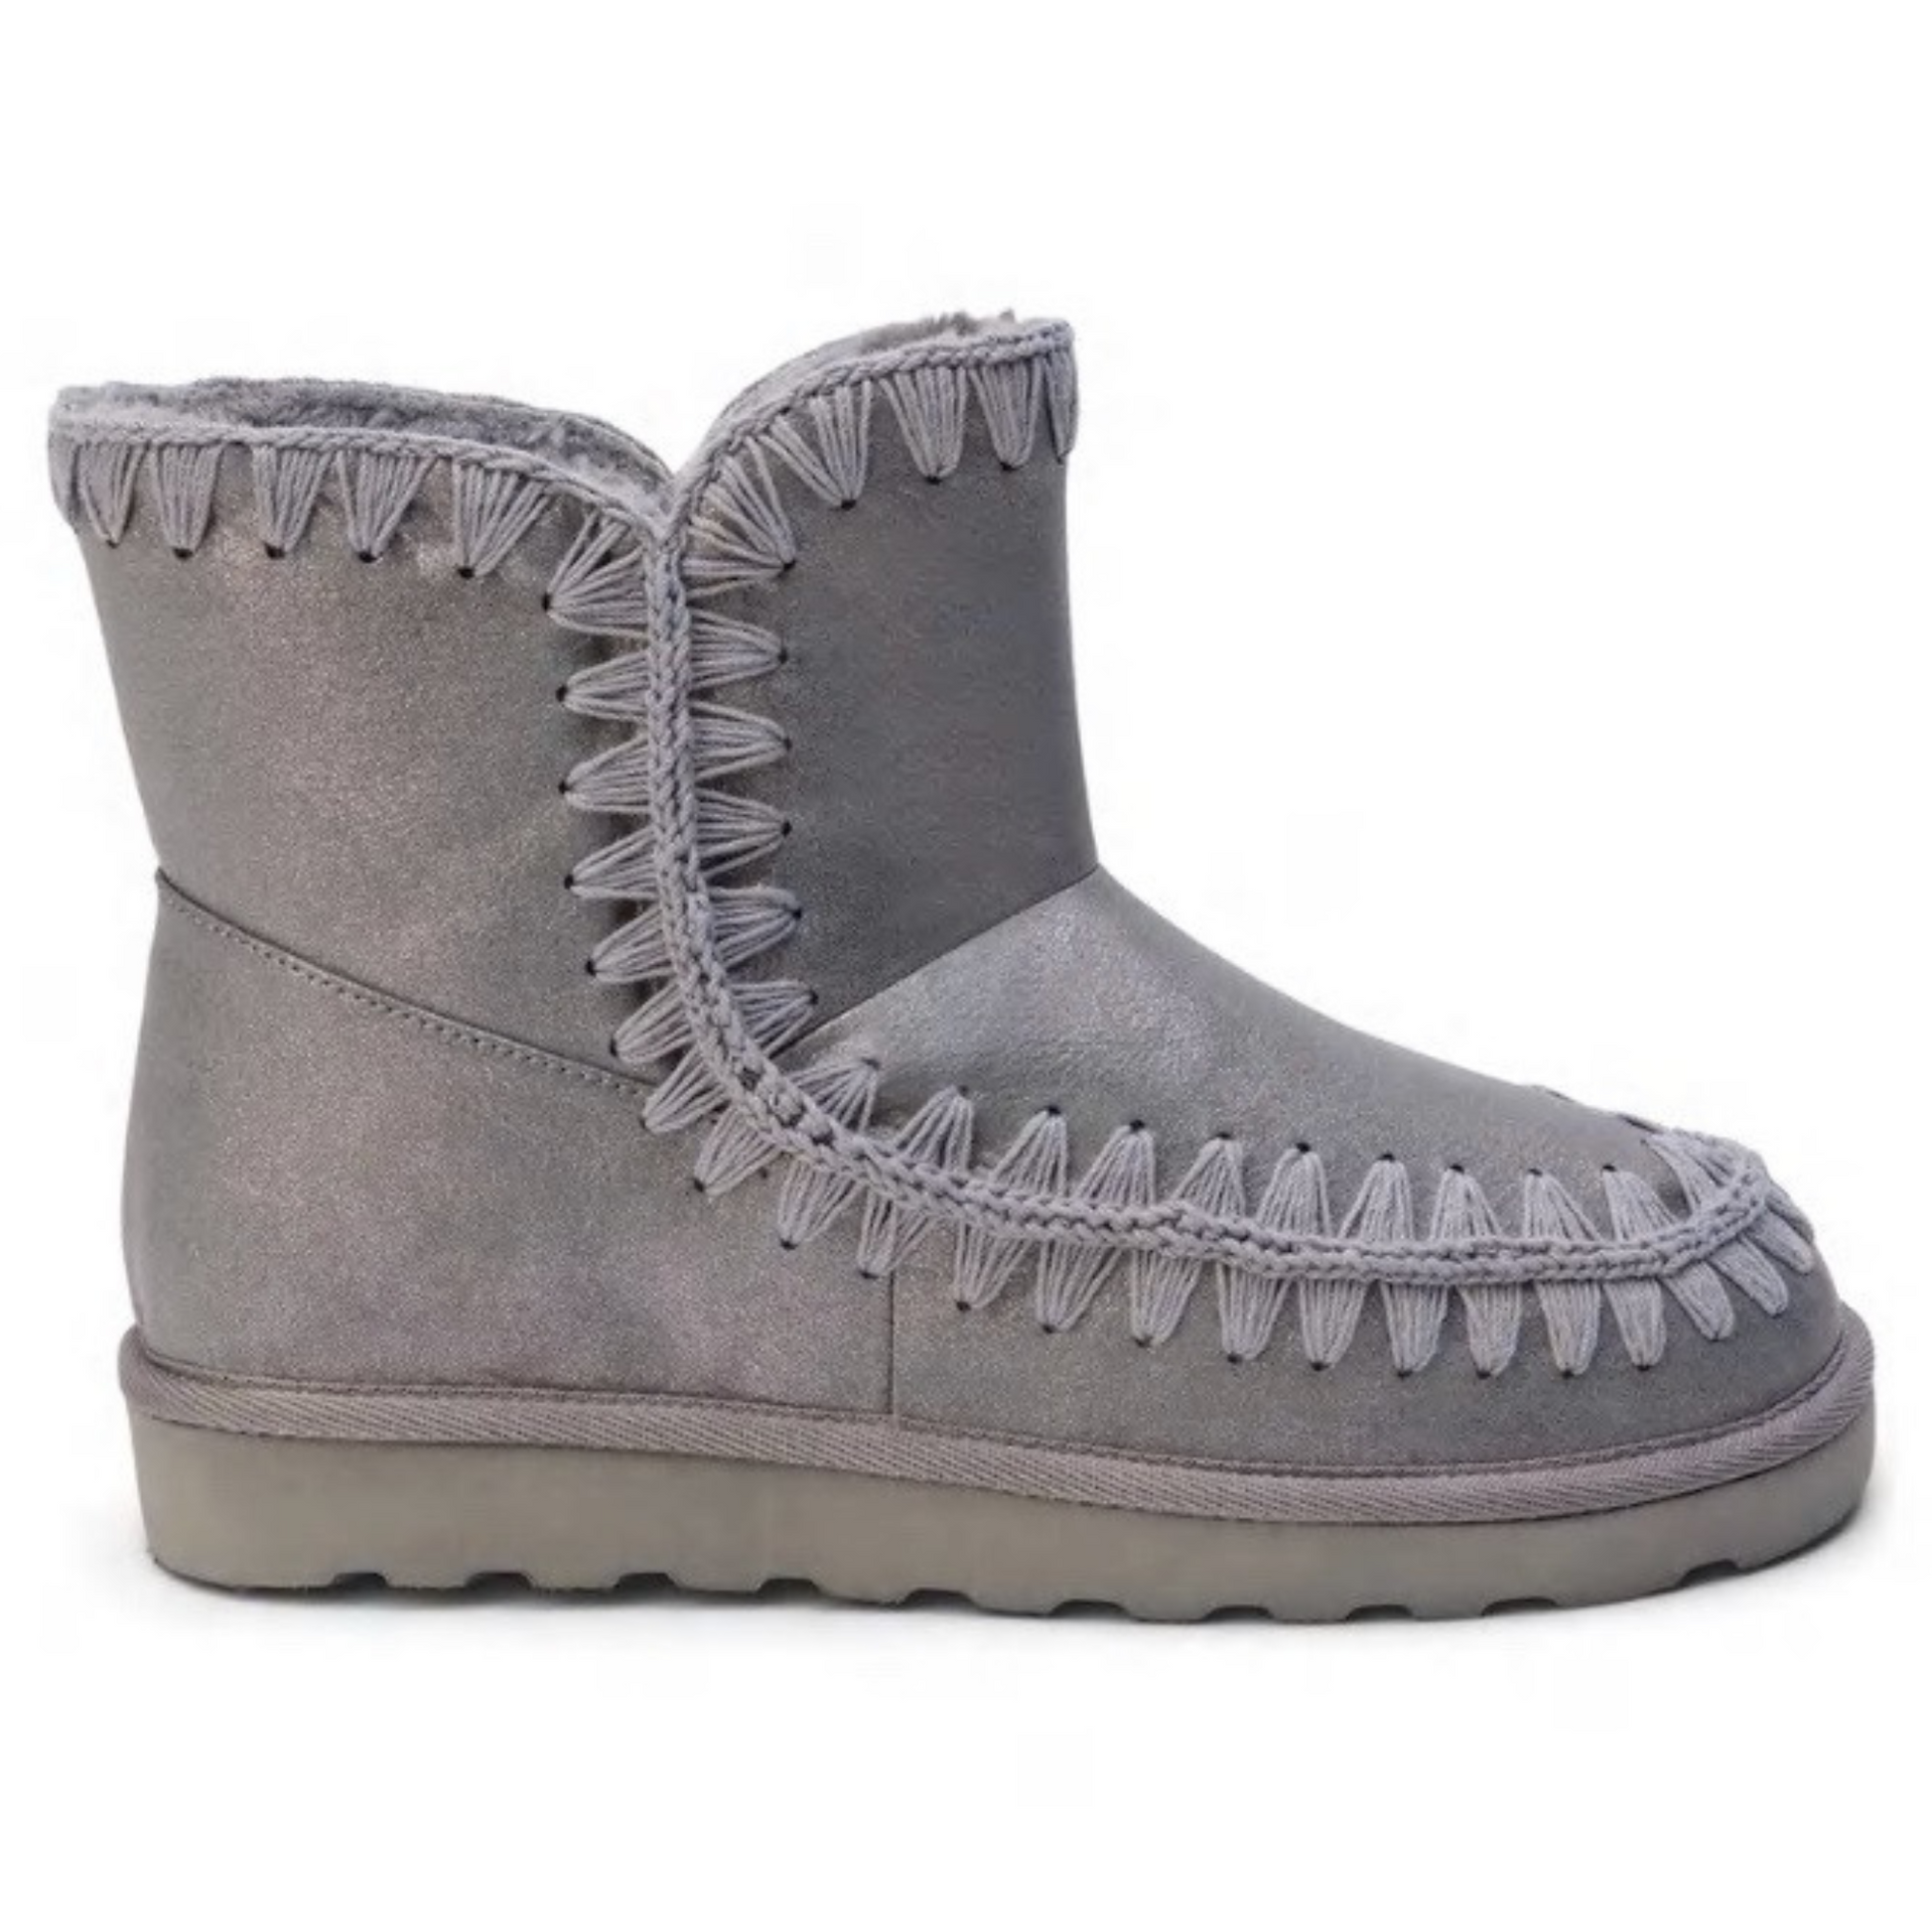 Tahoe bootie by Matisse in Pewter color